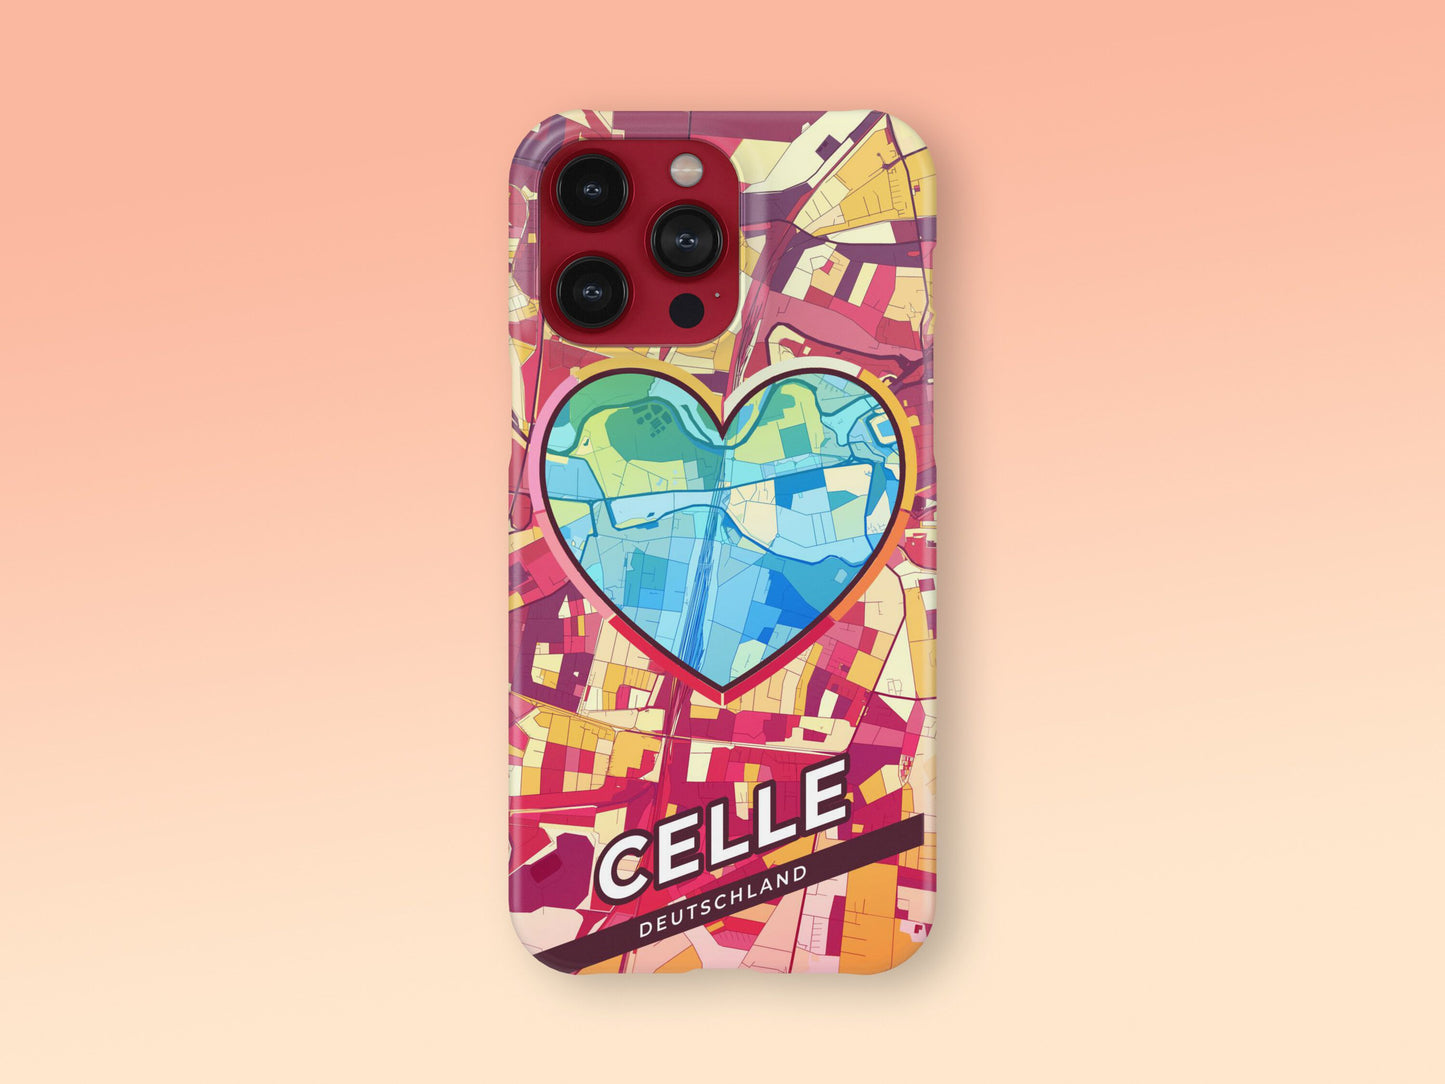 Celle Deutschland slim phone case with colorful icon. Birthday, wedding or housewarming gift. Couple match cases. 2